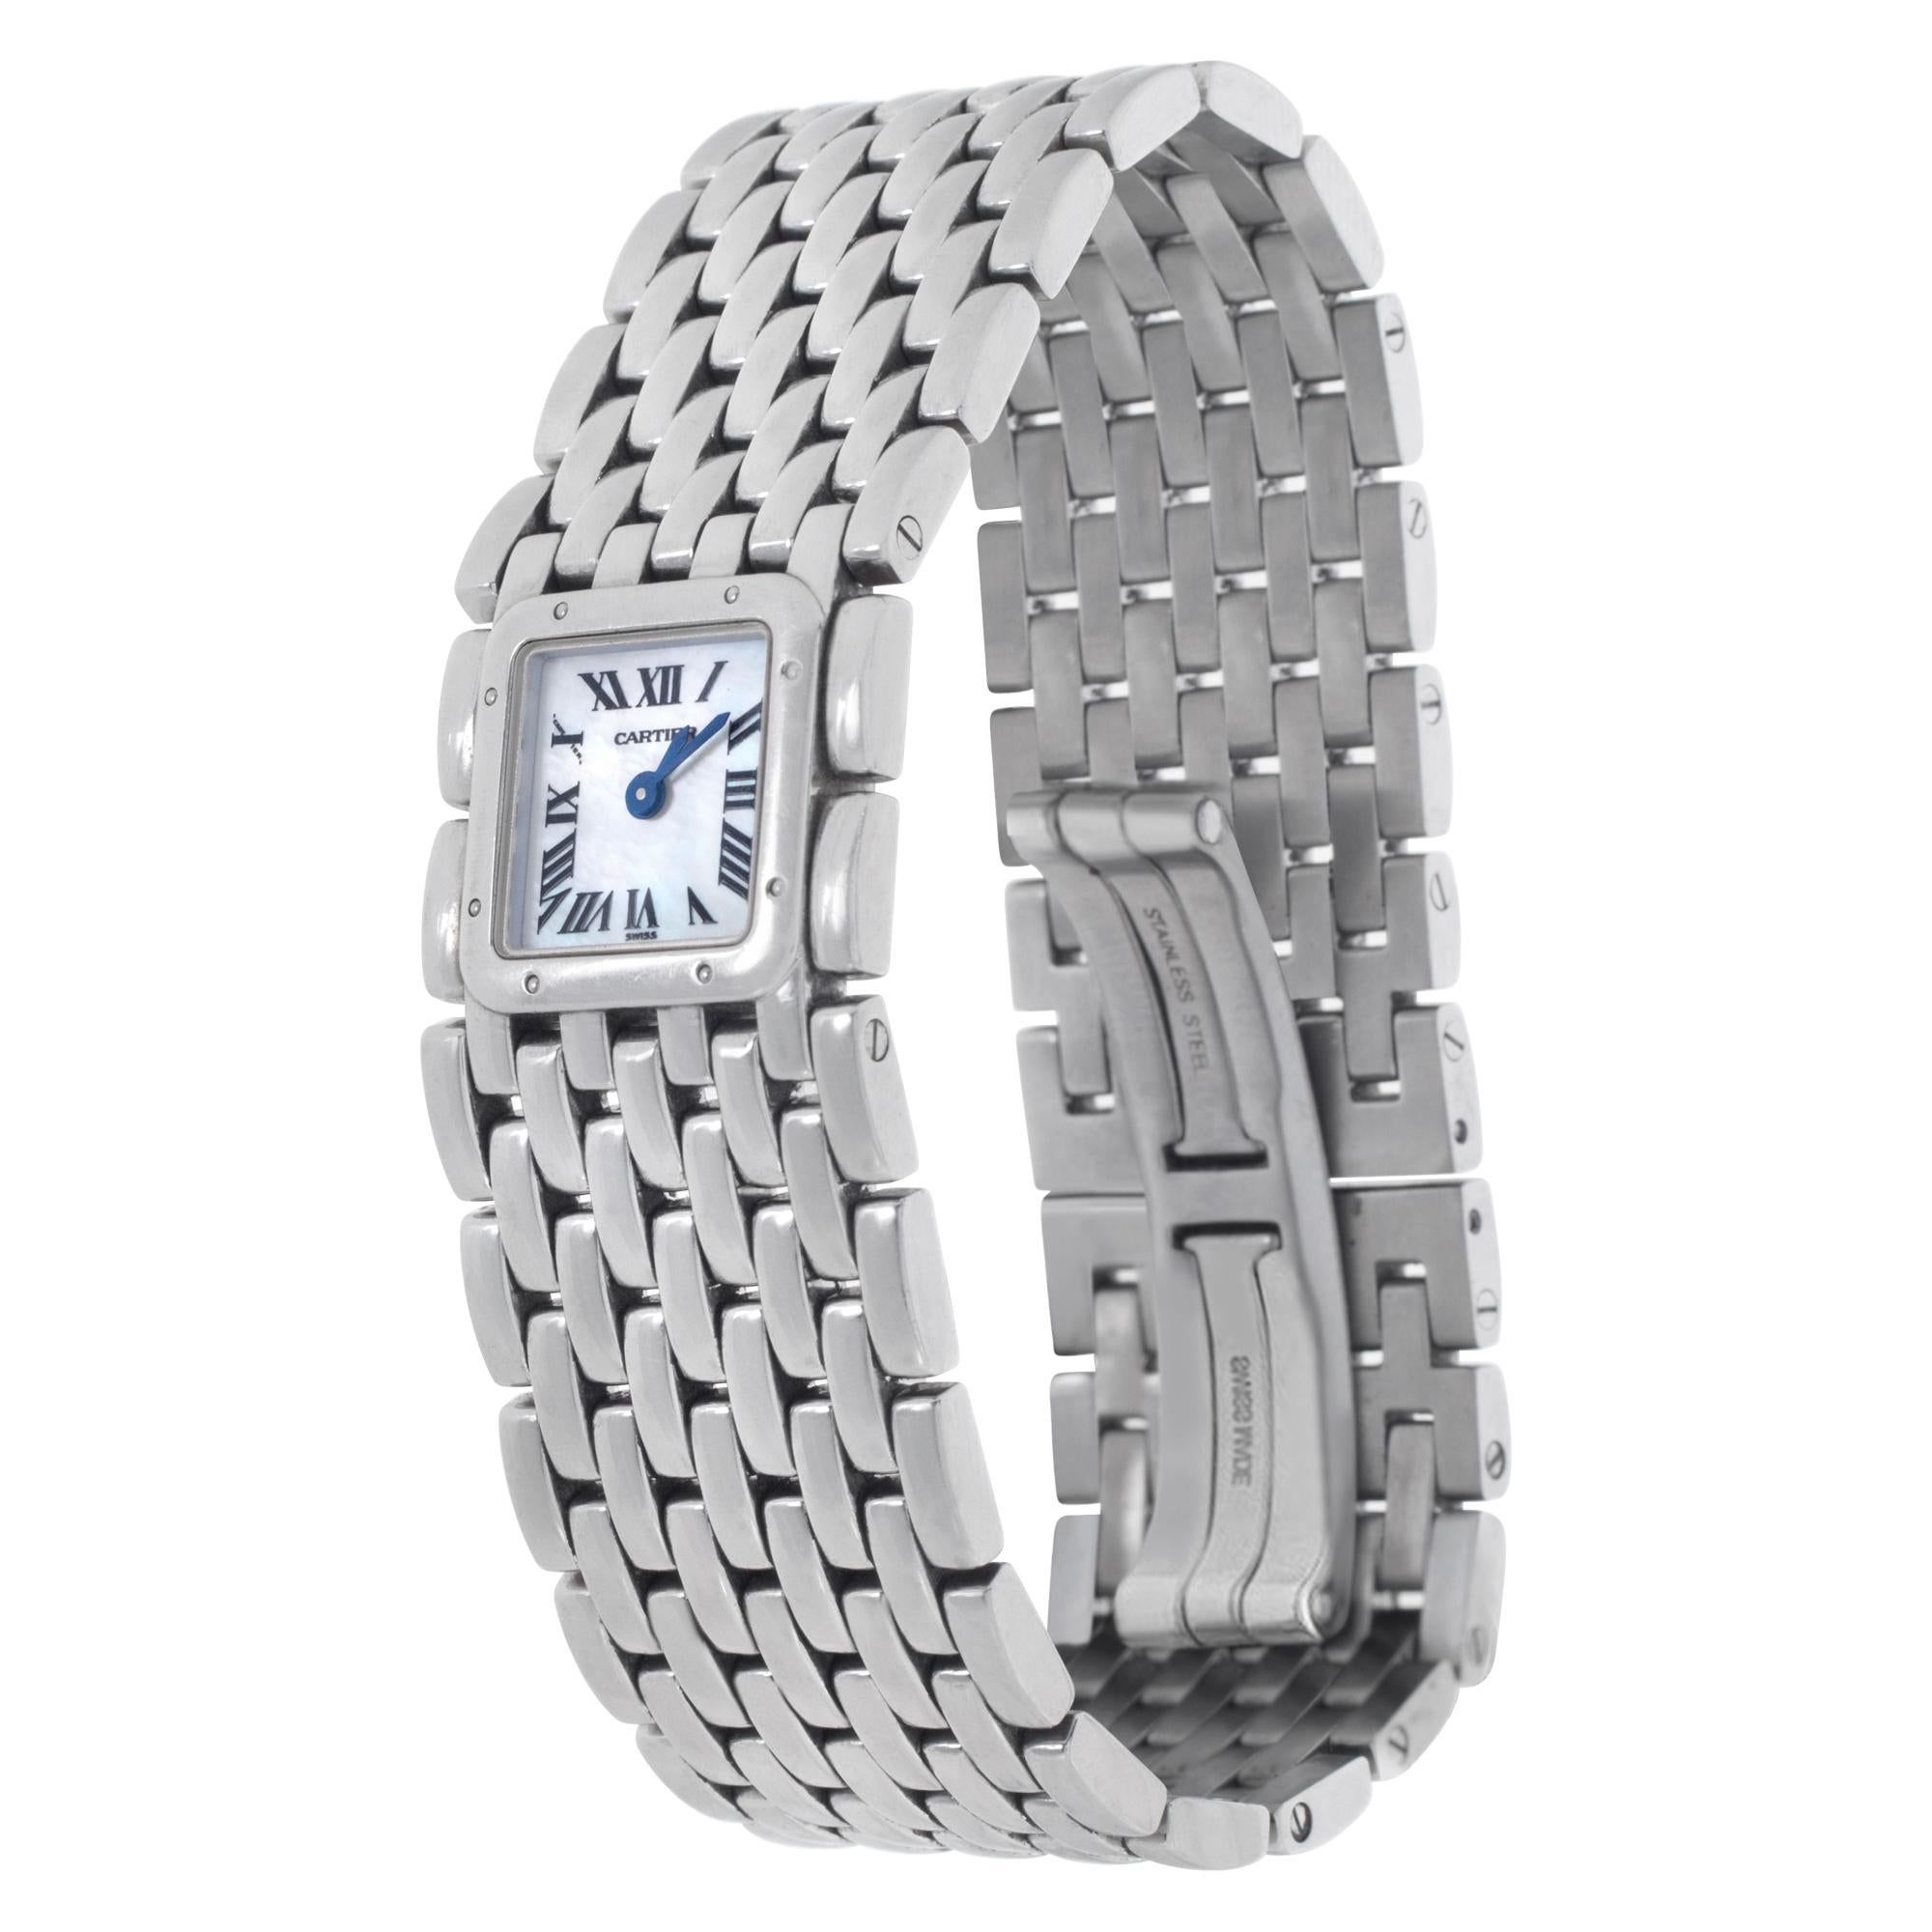 Cartier Ruban in stainless steel. Quartz. 21.5 mm case size. Ref W61001t9 Fine Pre-owned Cartier Watch.

Certified preowned Classic Cartier Ruban W61001t9 watch is made out of Stainless steel on a Stainless Steel bracelet with a Stainless Steel